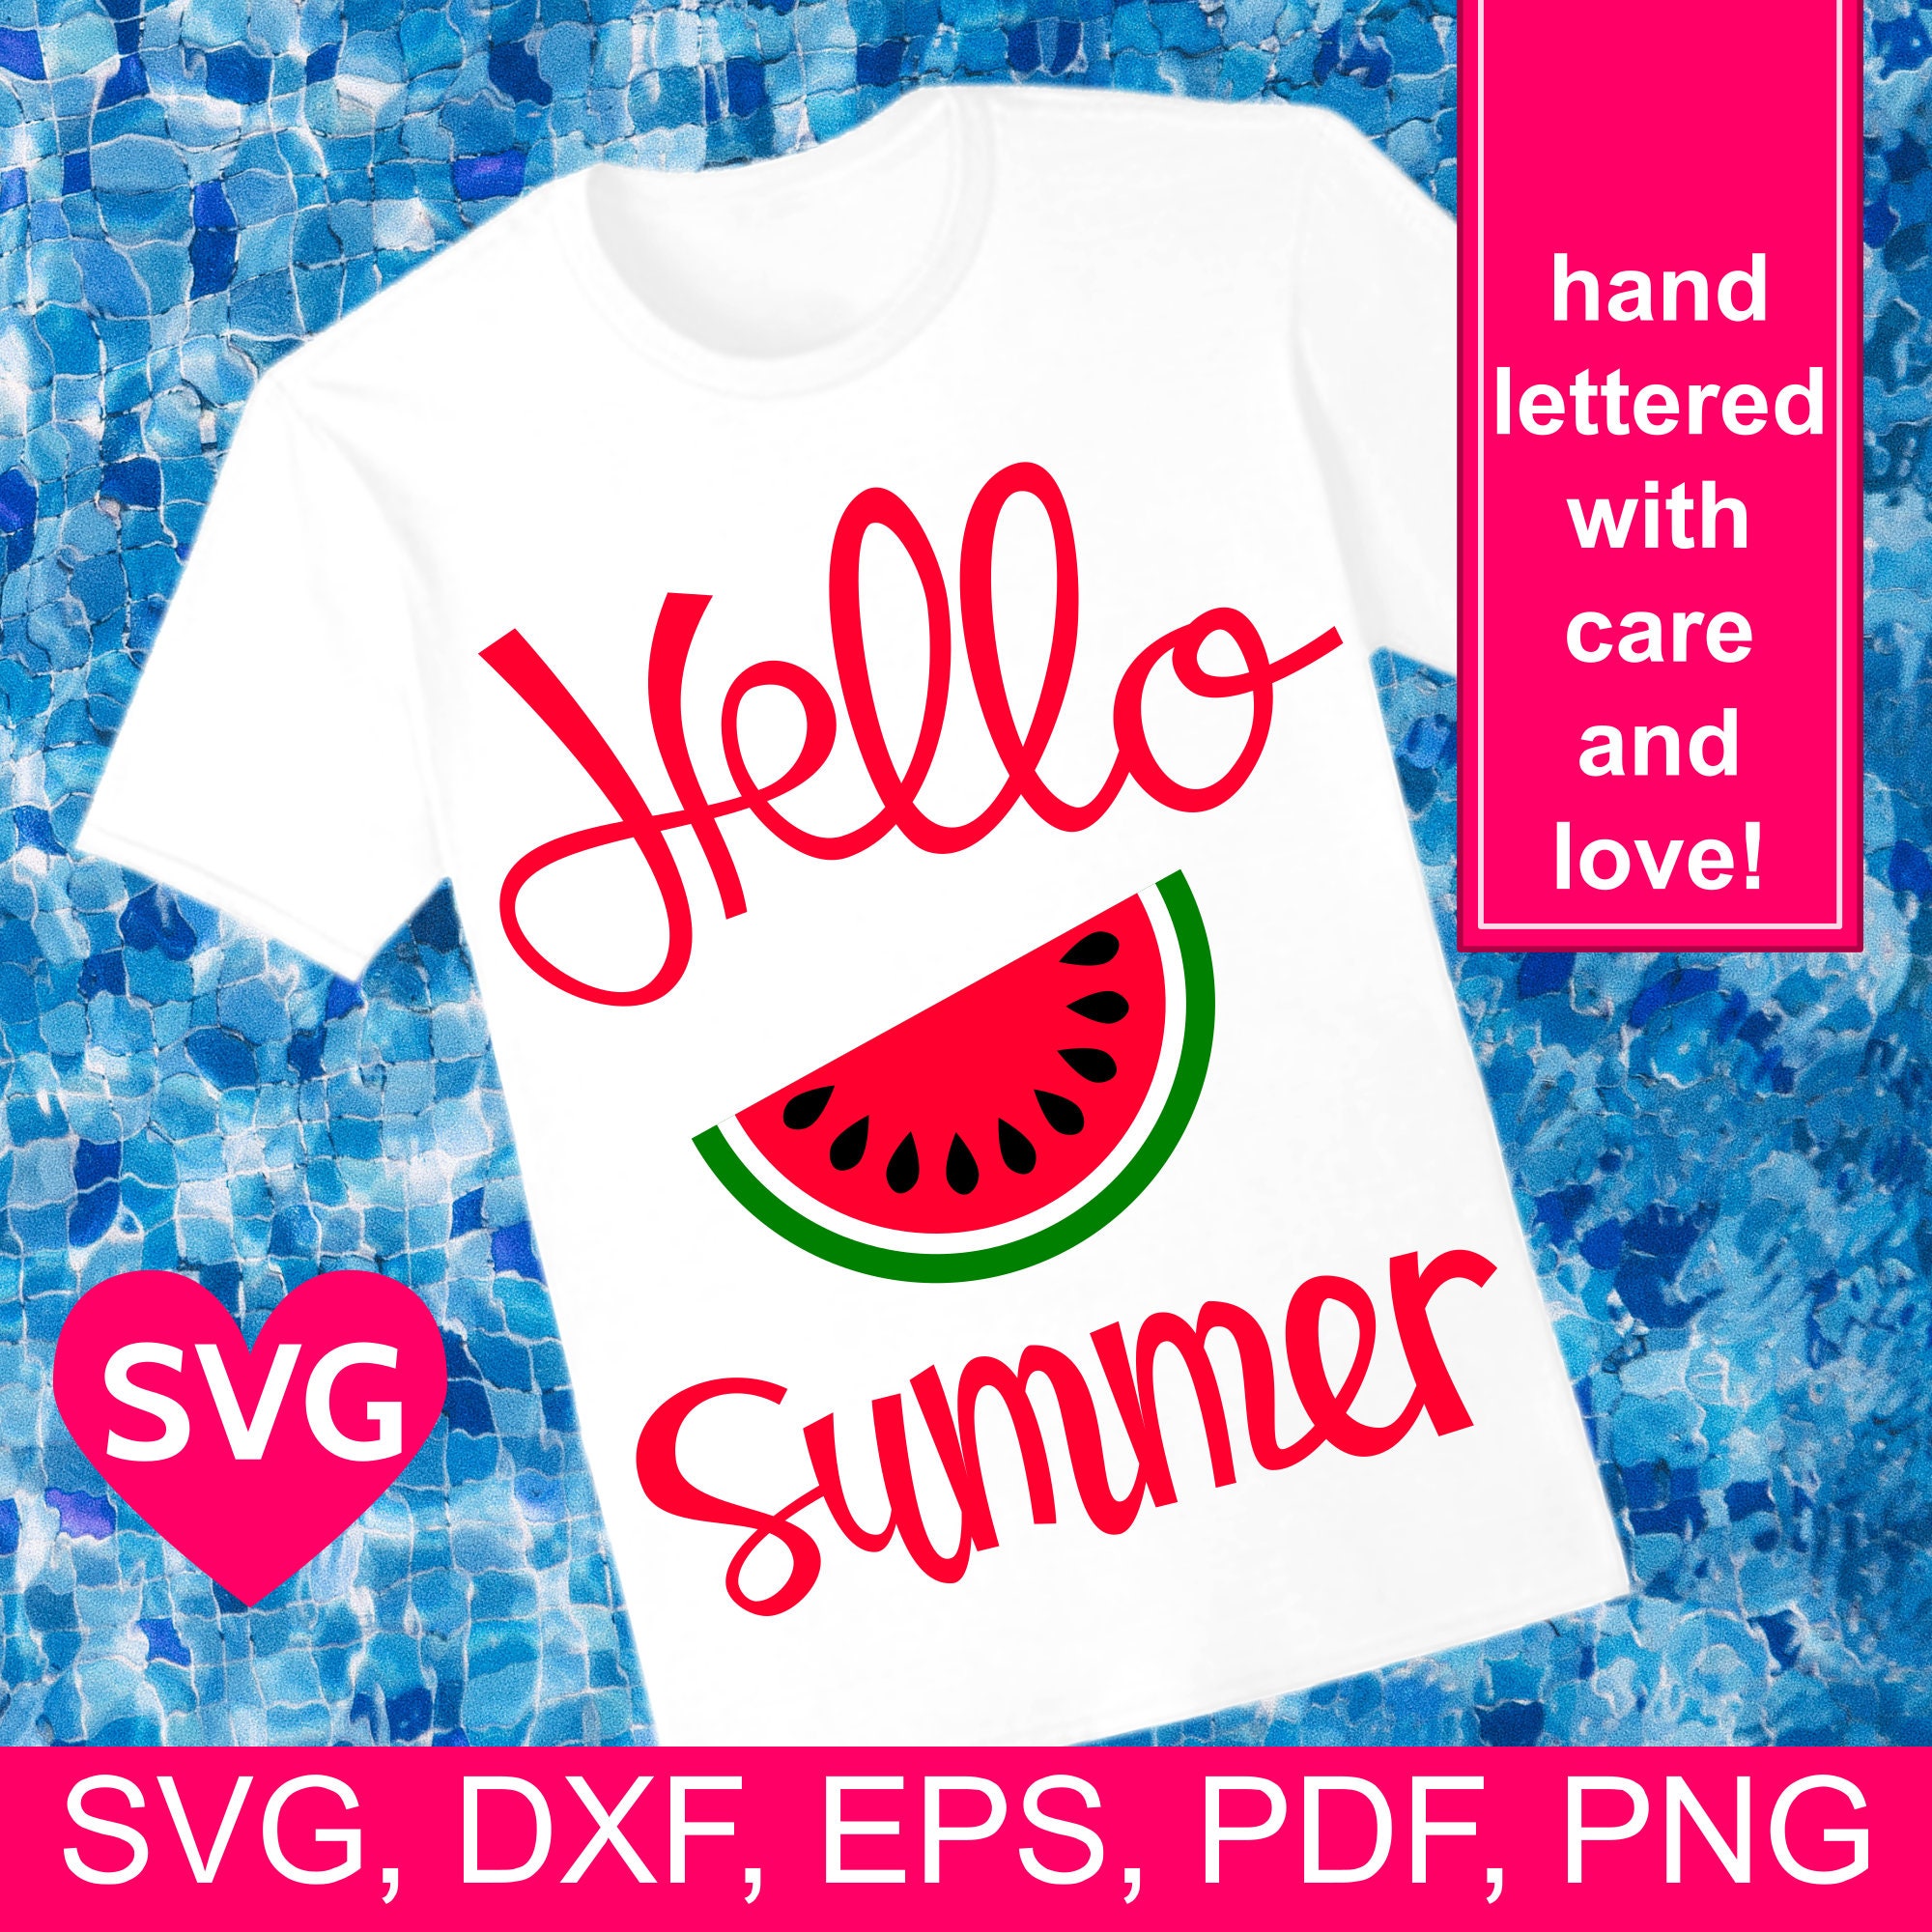 Download Hello Summer with Watermelon SVG file for Cricut and ...